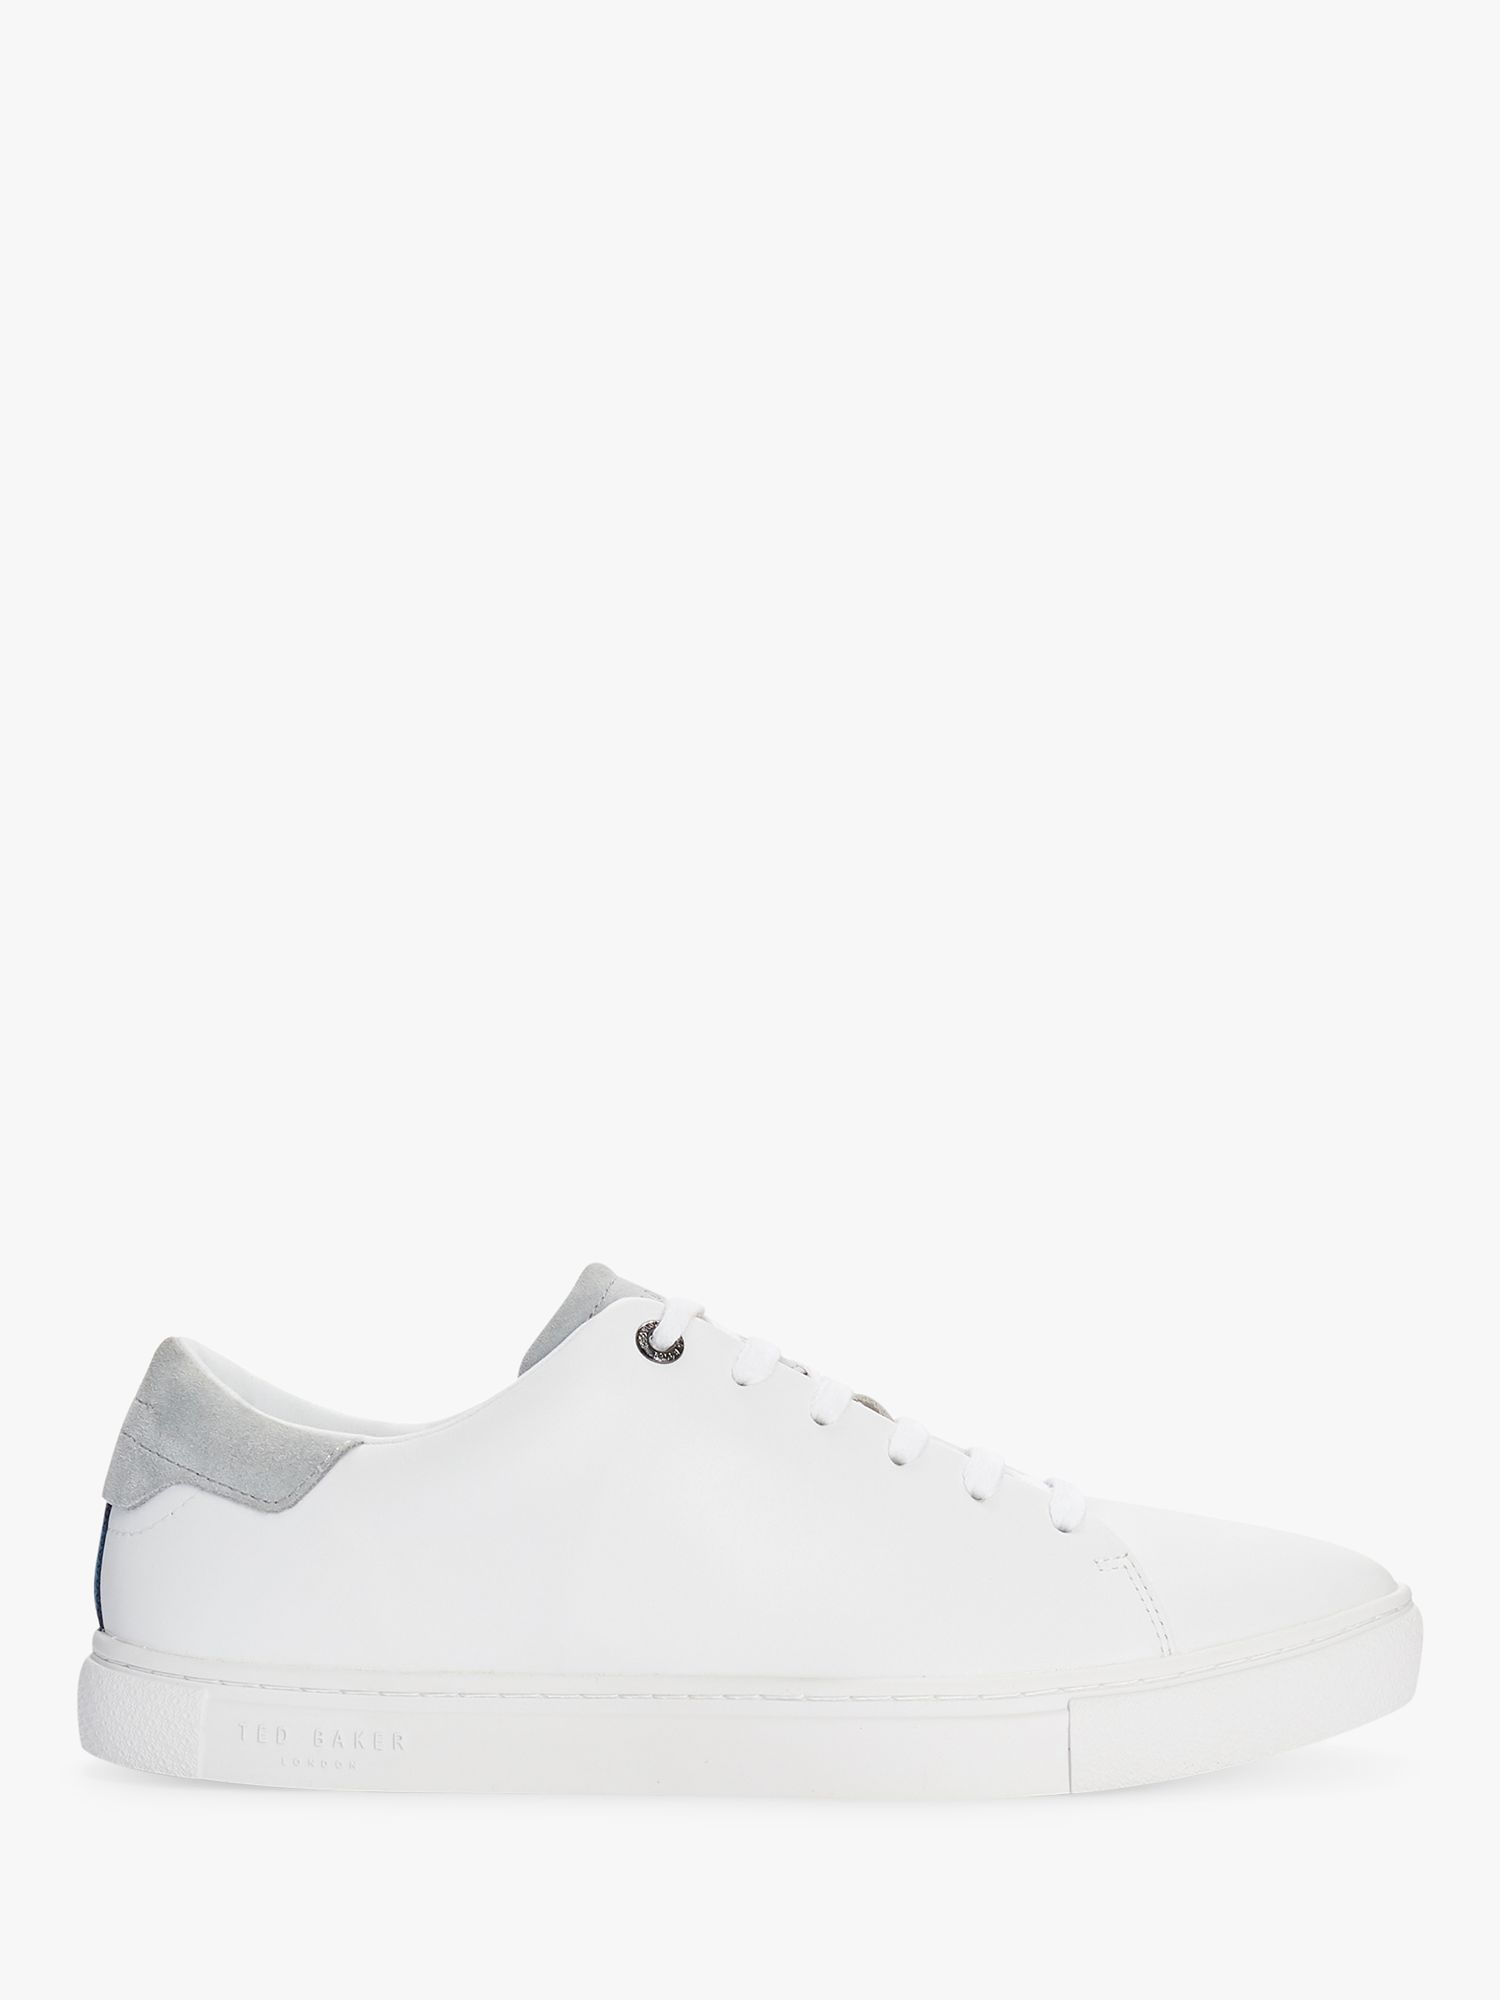 Ted Baker Ruennan Leather Trainers, White/Grey/Blue, 12